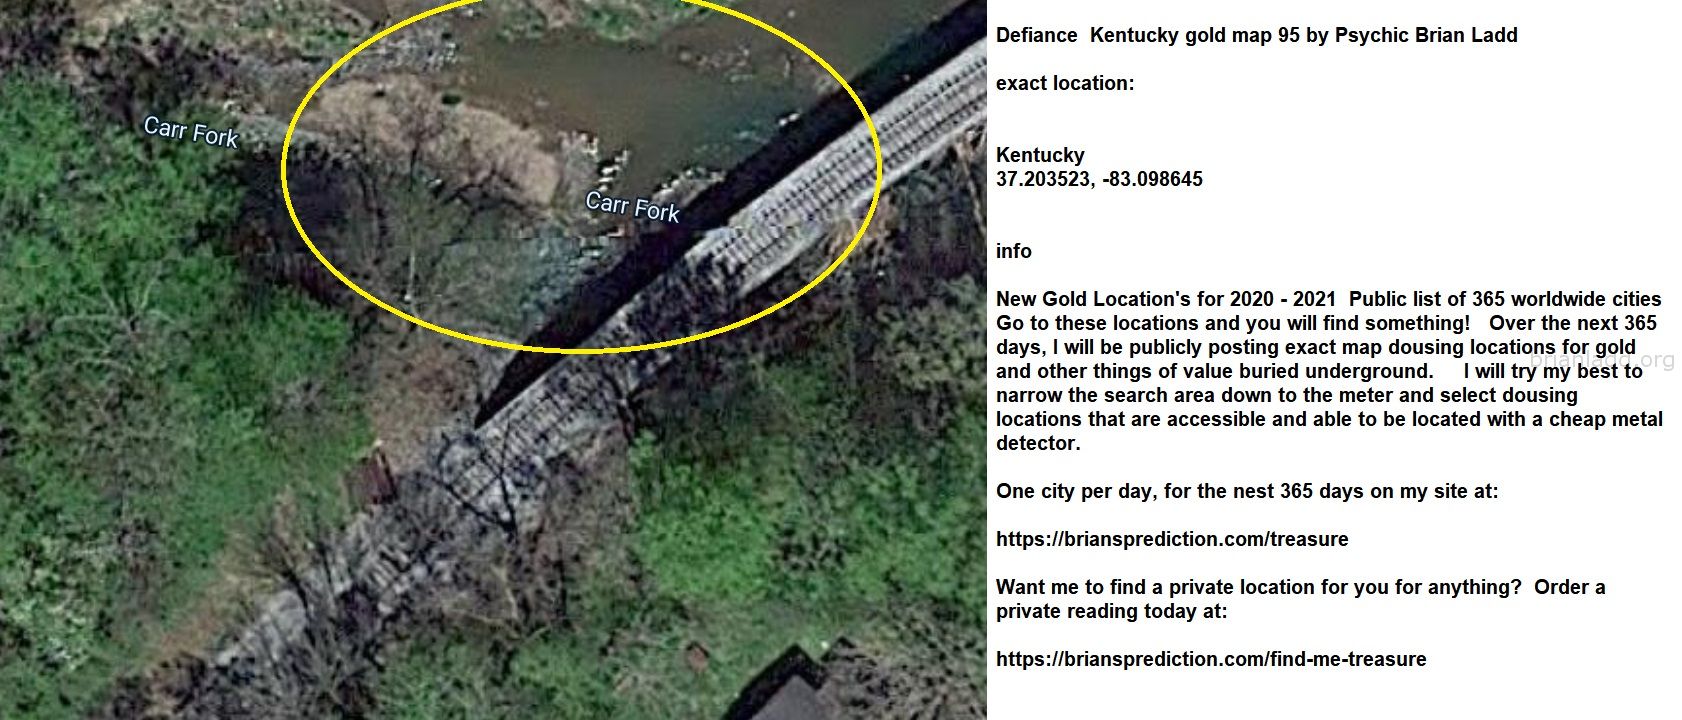 Defiance  Kentucky gold map 95 by Psychic Brian Ladd
New Gold Location's for 2020 - 2021  Public list of 365 worldwide cities   Go to these locations and you will find something!   Over the next 365 days, I will be publicly posting exact map dousing locations for gold and other things of value buried underground.     I will try my best to narrow the search area down to the meter and select dousing locations that are accessible and able to be located with a cheap metal detector. One city per day, for the nest 365 days on my site at:  https://briansprediction.com/treasure  Want me to find a private location for you for anything?  Order a private reading today at:  https://briansprediction.com/find-me-treasure
